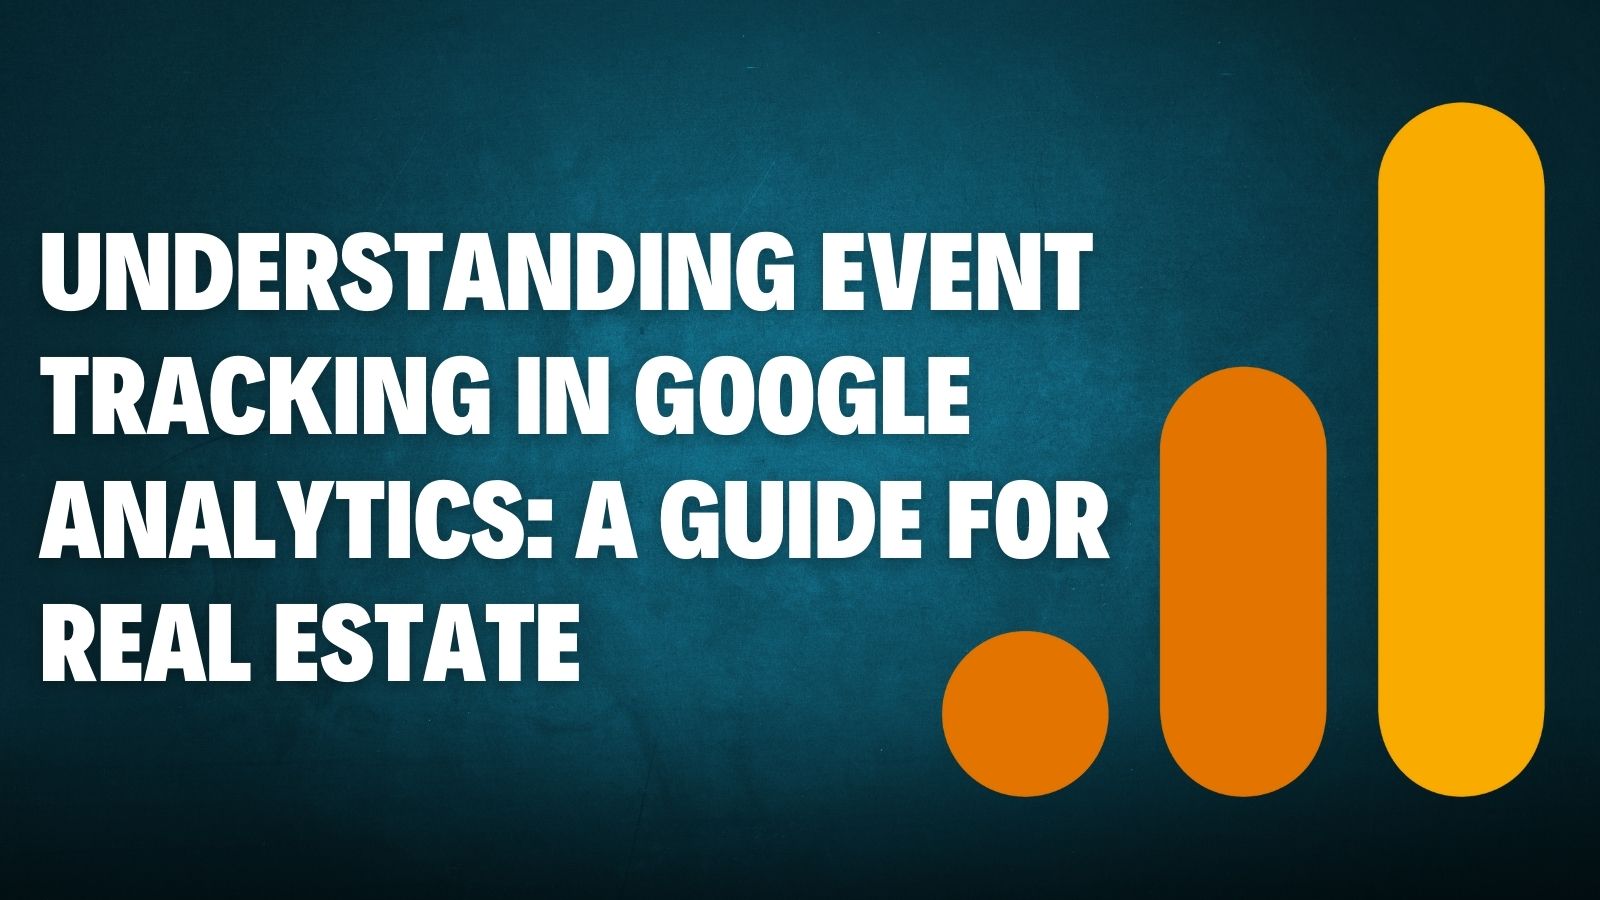 Understanding Event Tracking in Google Analytics: A Guide for Real Estate